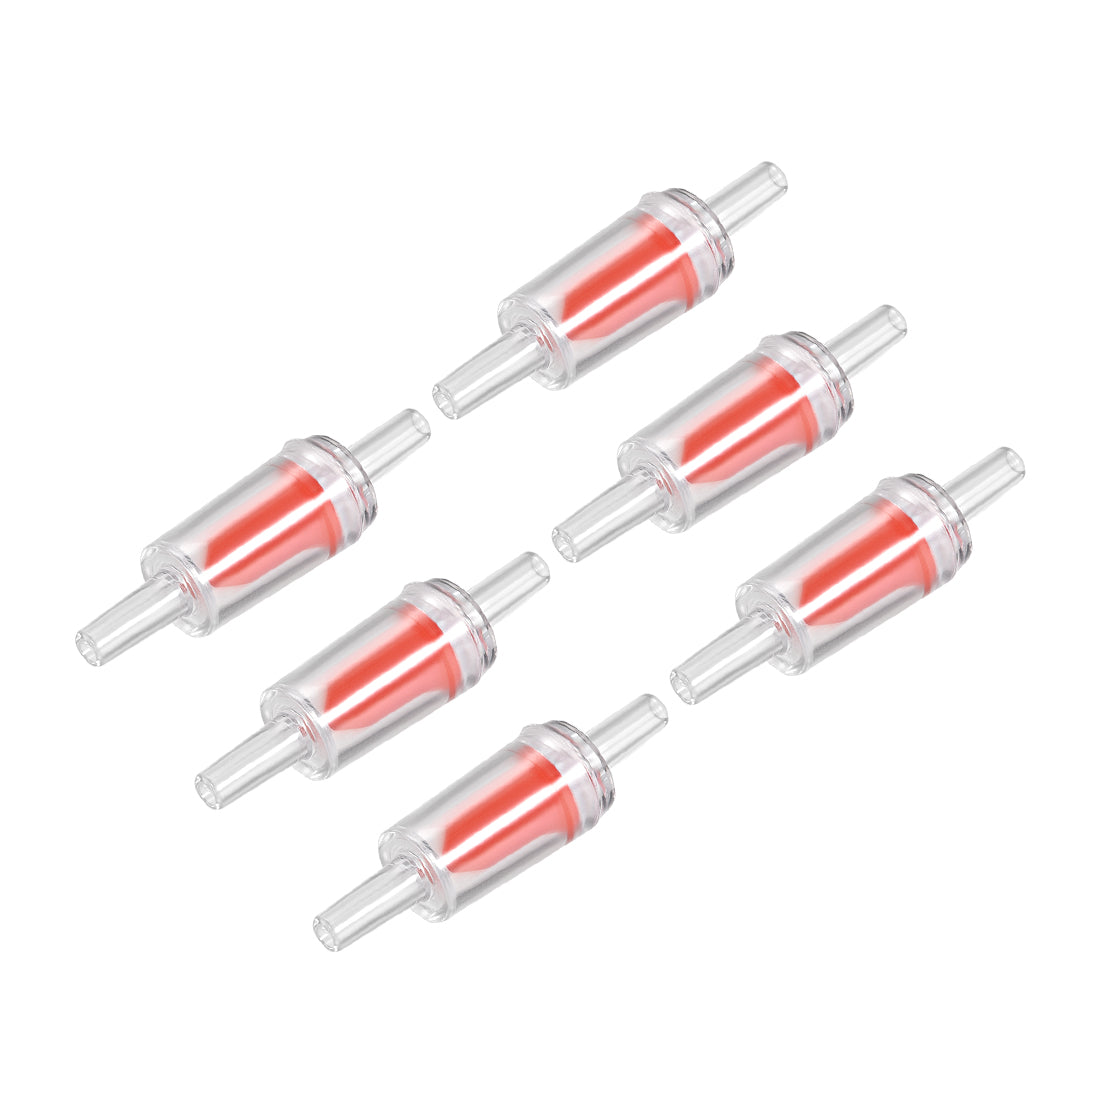 uxcell Uxcell Aquarium Air Pump Check Valves Red Clear Plastic One Way Non-Return Check Valve for Fish Tank 6Pcs